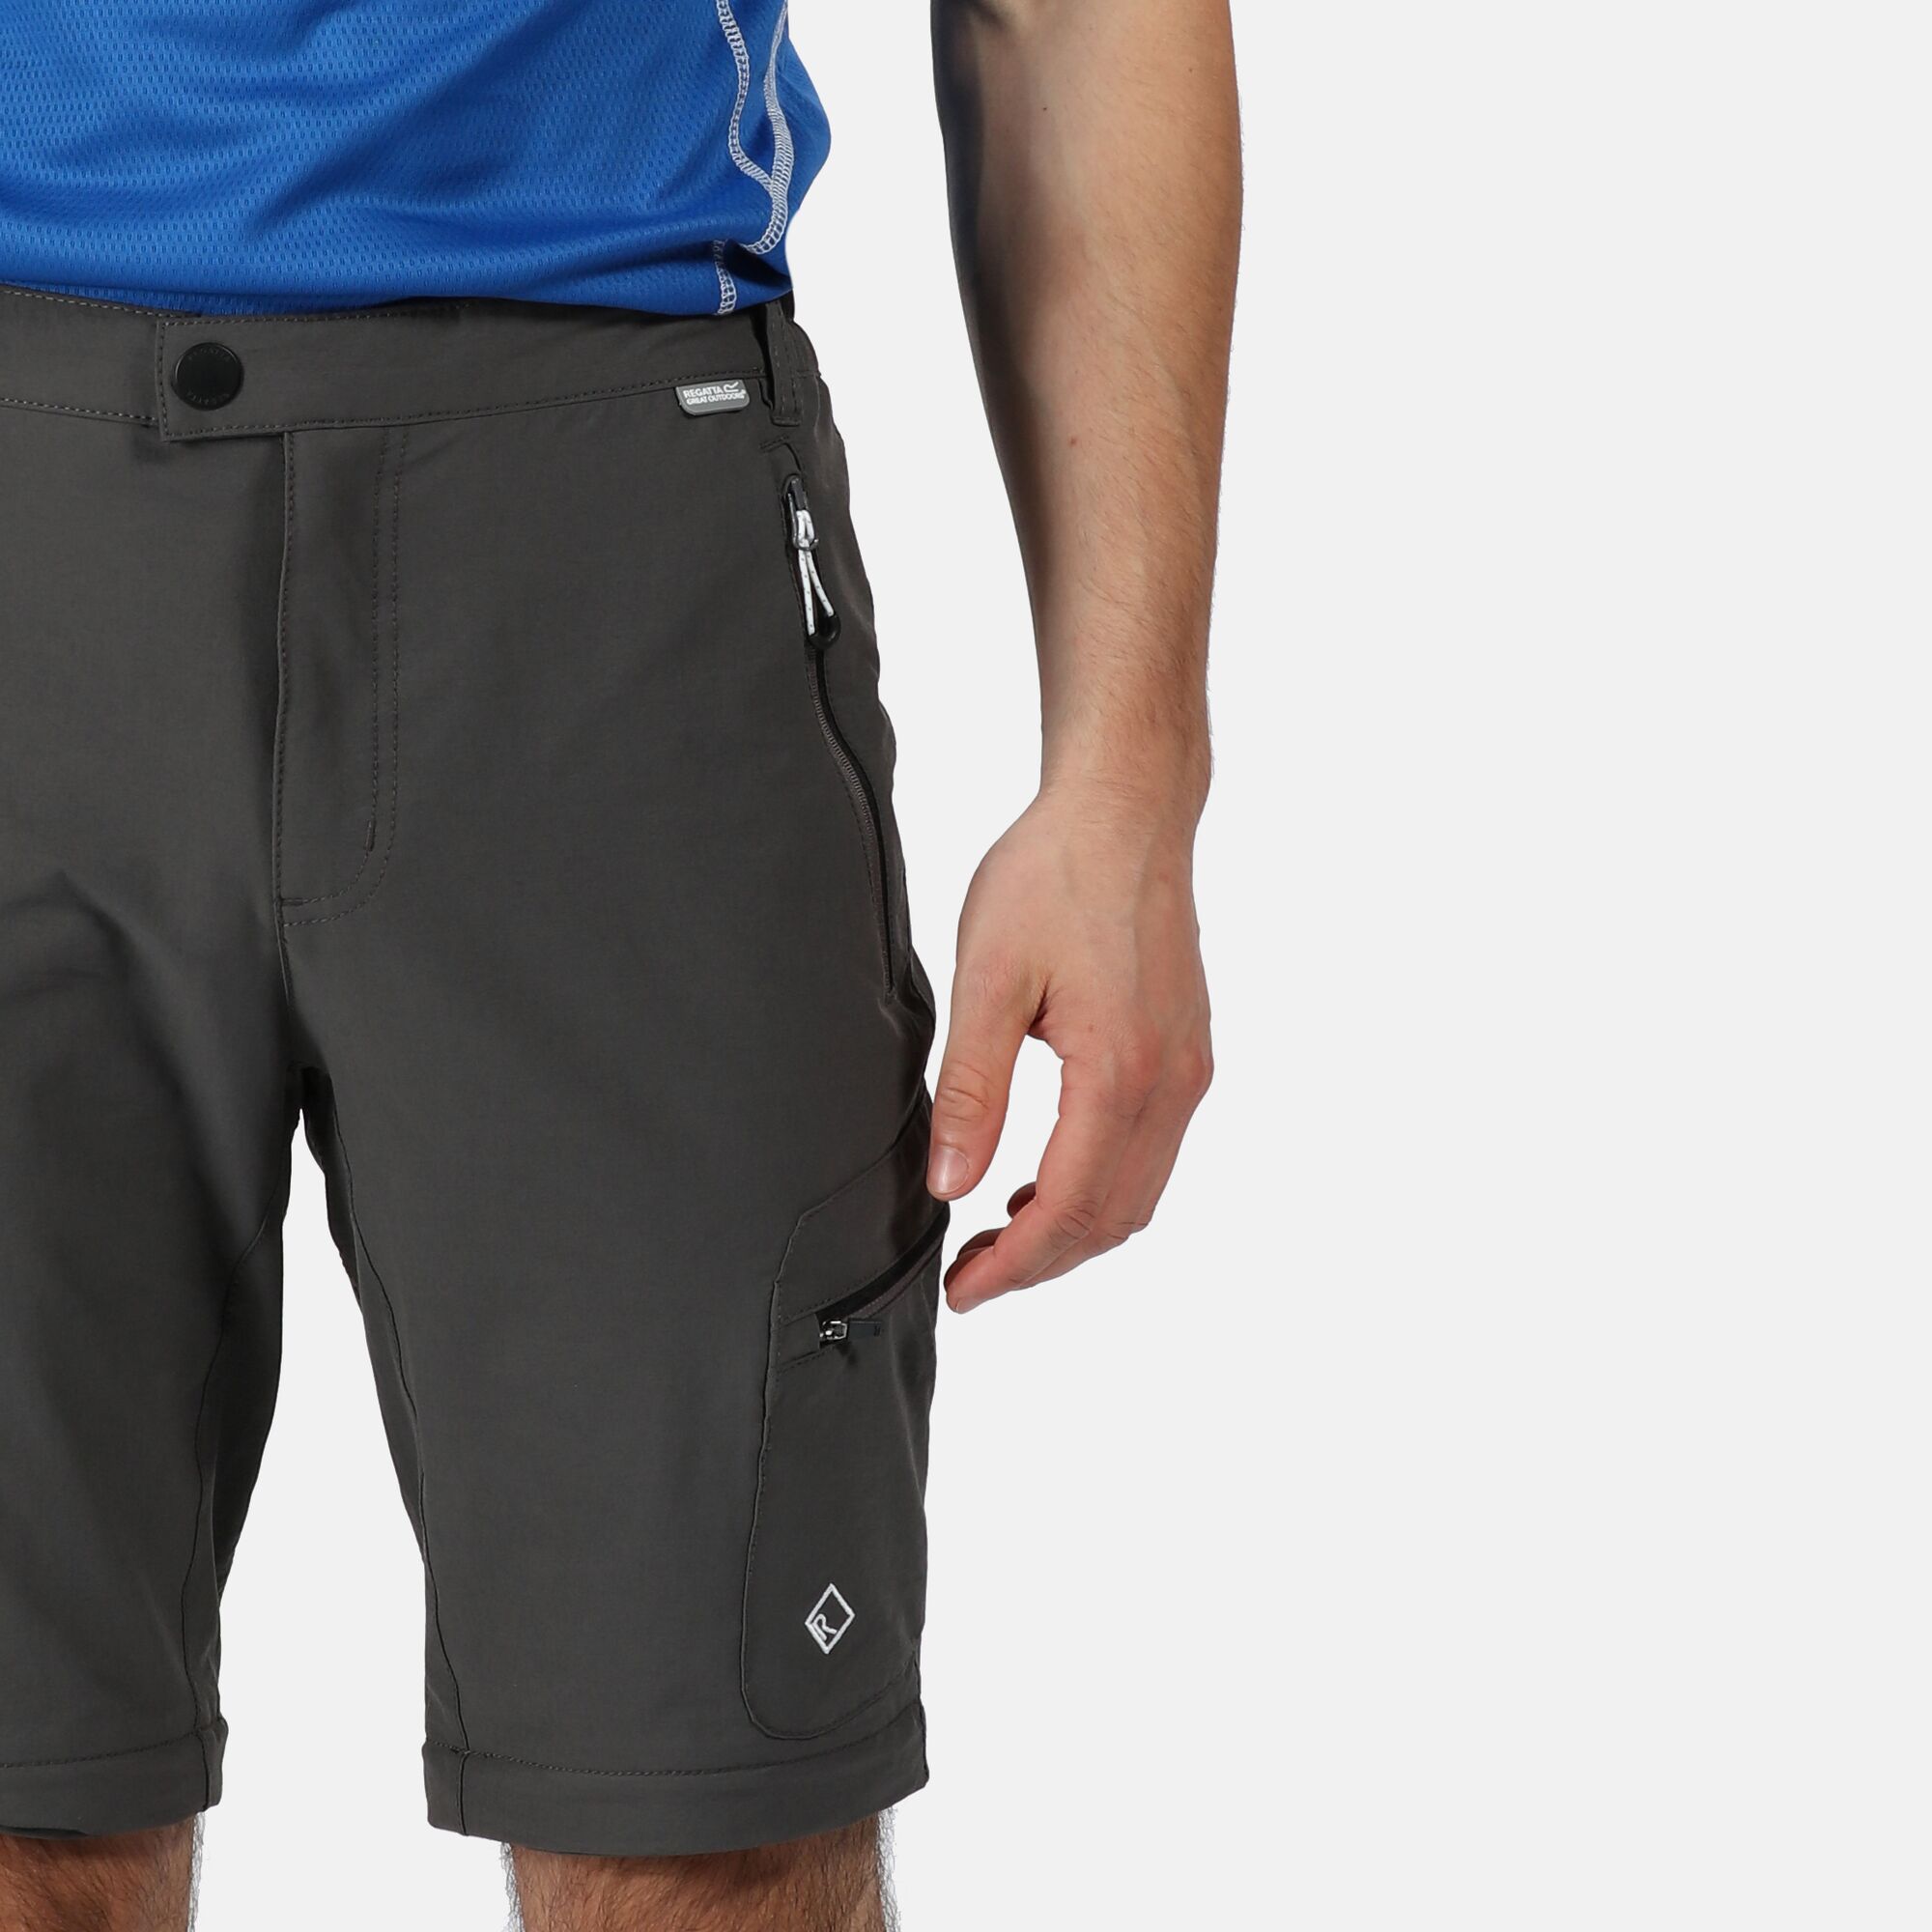 Material: 94% Polyamide, 6% Elastane.. Durable water repellent finish. Part elasticated waist. Multi pocketed with zipped side pockets. Zip-off legs - converts into shorts.